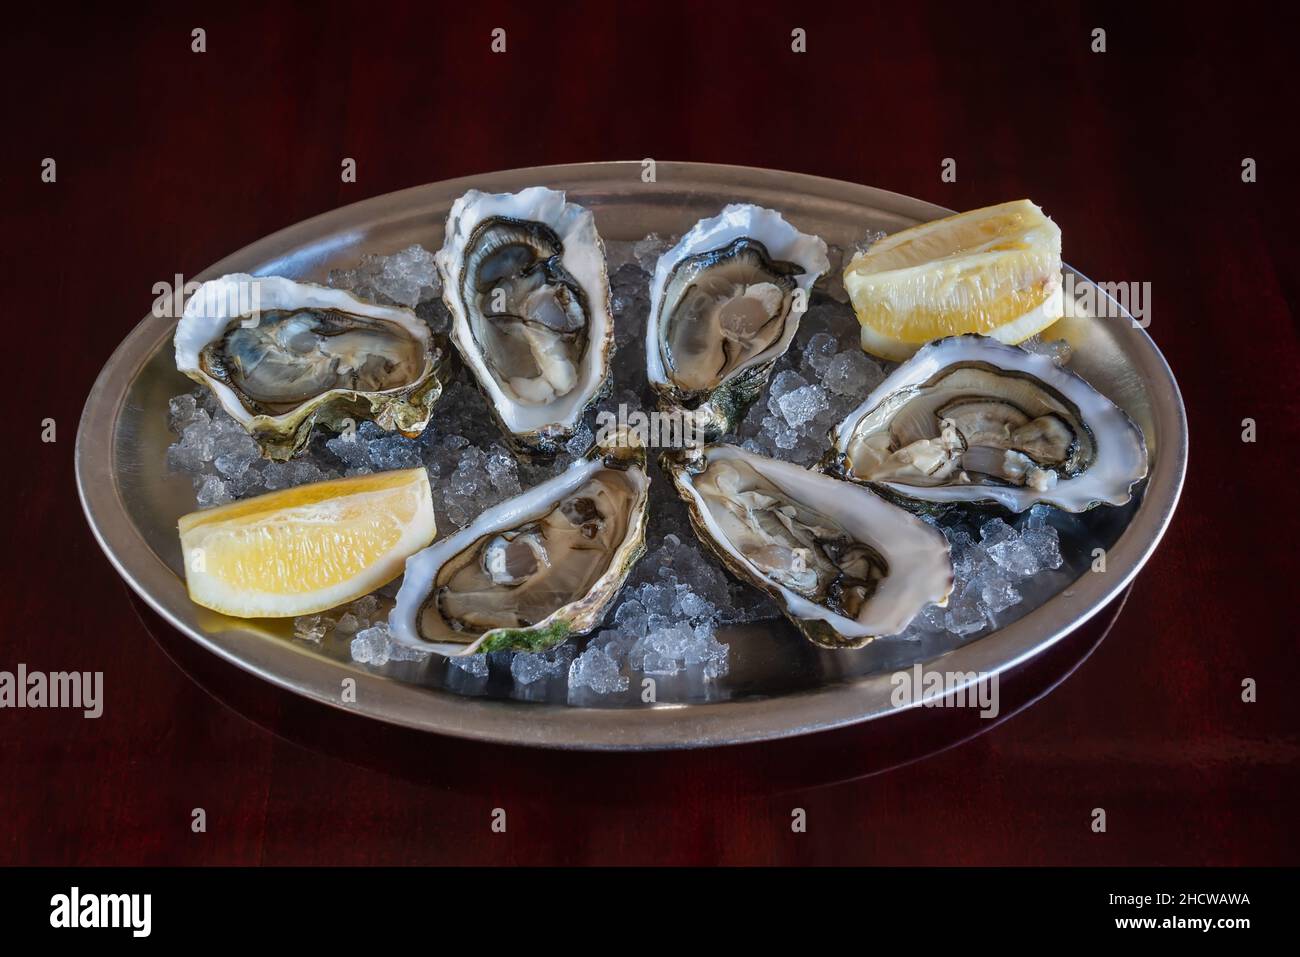 An exquisite and expensive dish of sea clams of oysters with ice and lemon on an iron plate on a wooden table. Stock Photo